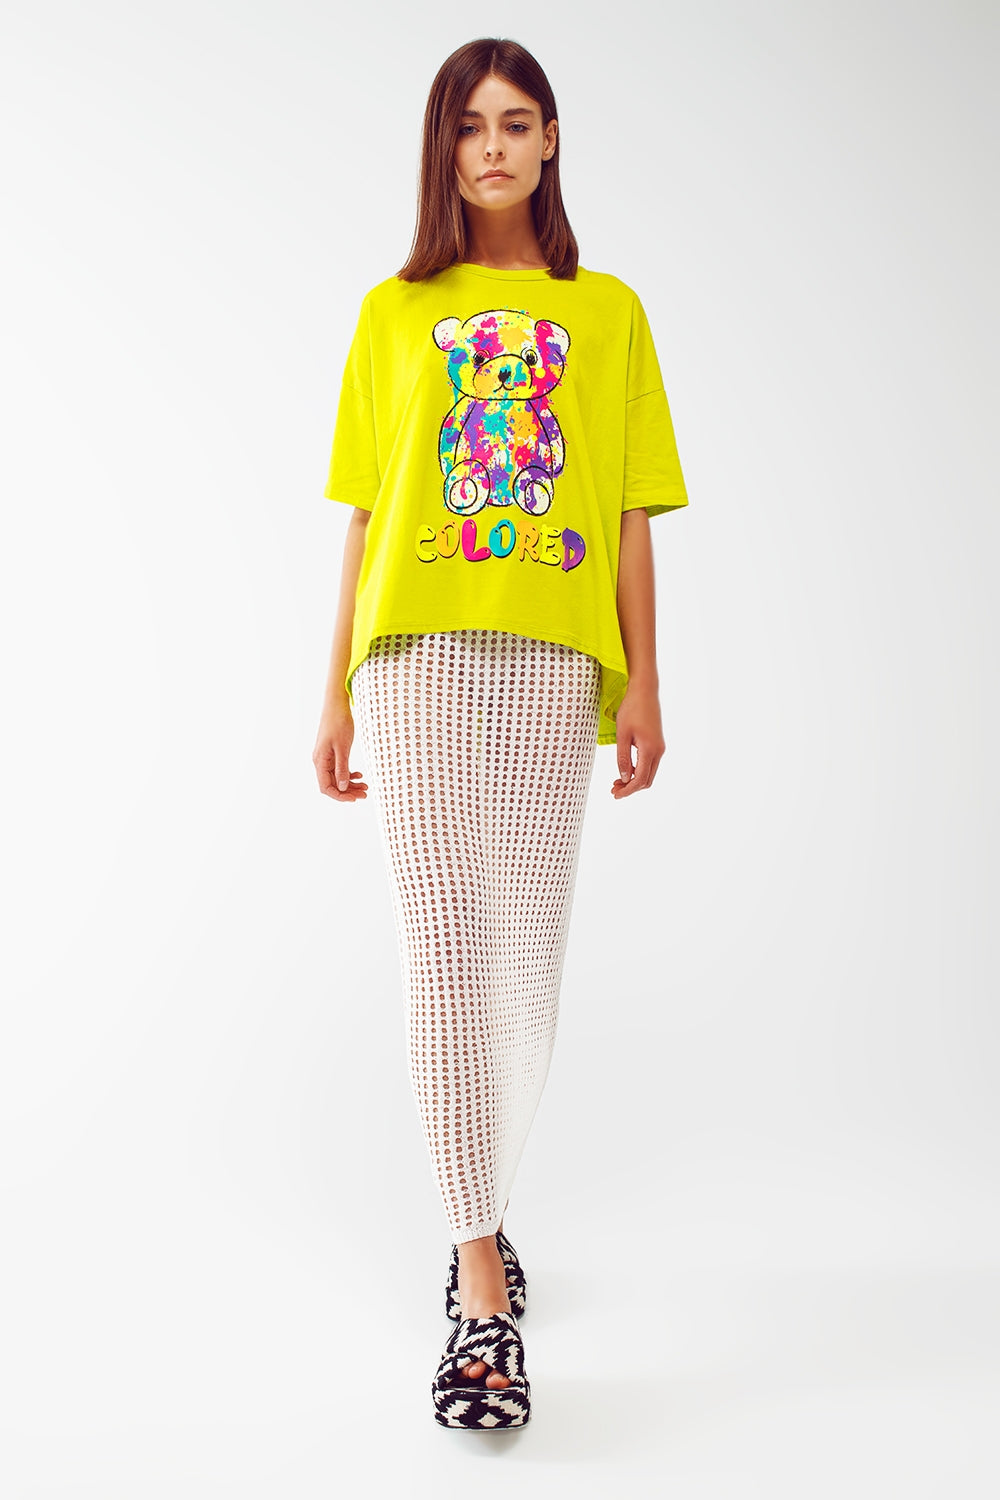 Loose-fitting lime T-shirt with colored bear - Szua Store